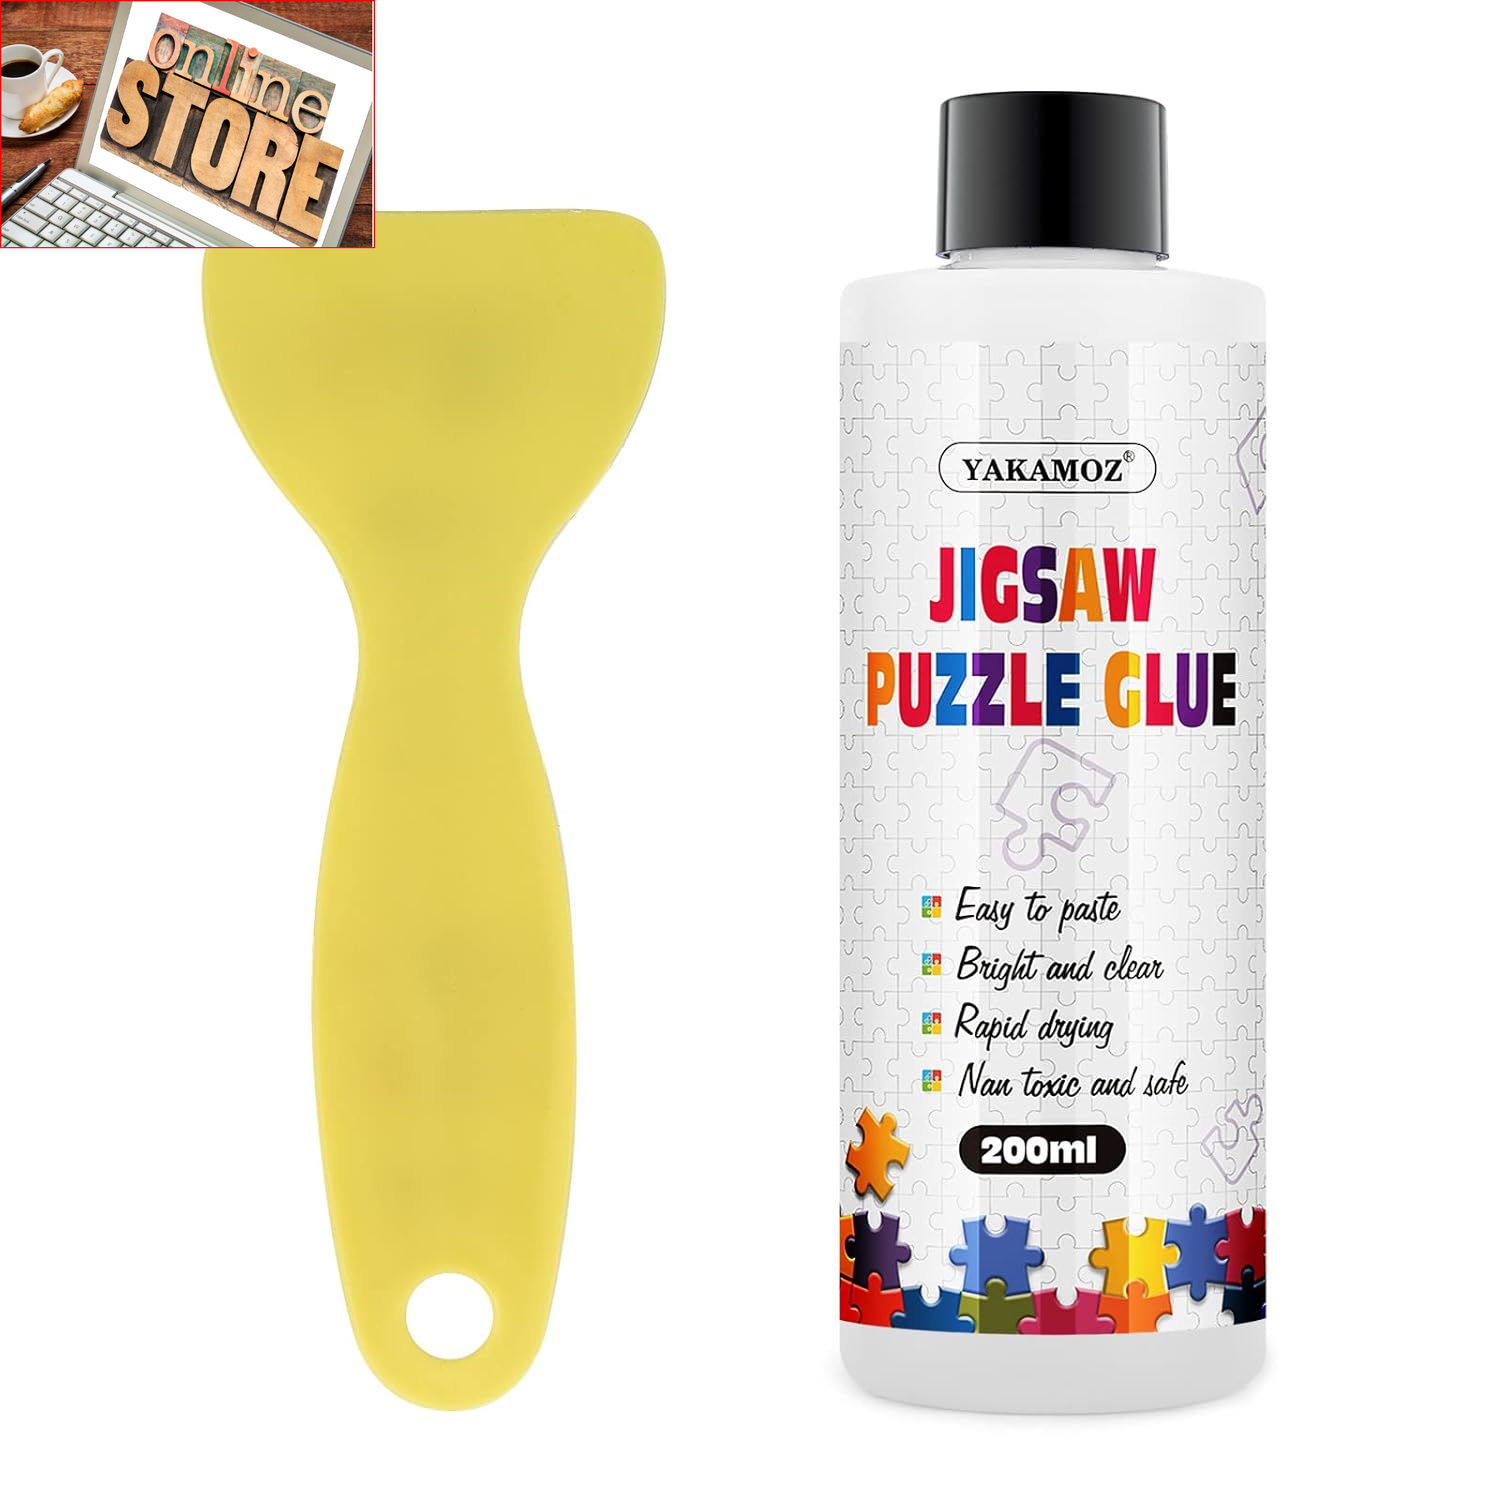 Jigsaw Puzzle Glue with Applicator Clear Water-Soluble Special Craft Puzzle Glue, Non-Toxic and Quick Dry for 3000/4500/5000 Pieces of Puzzle,200Ml